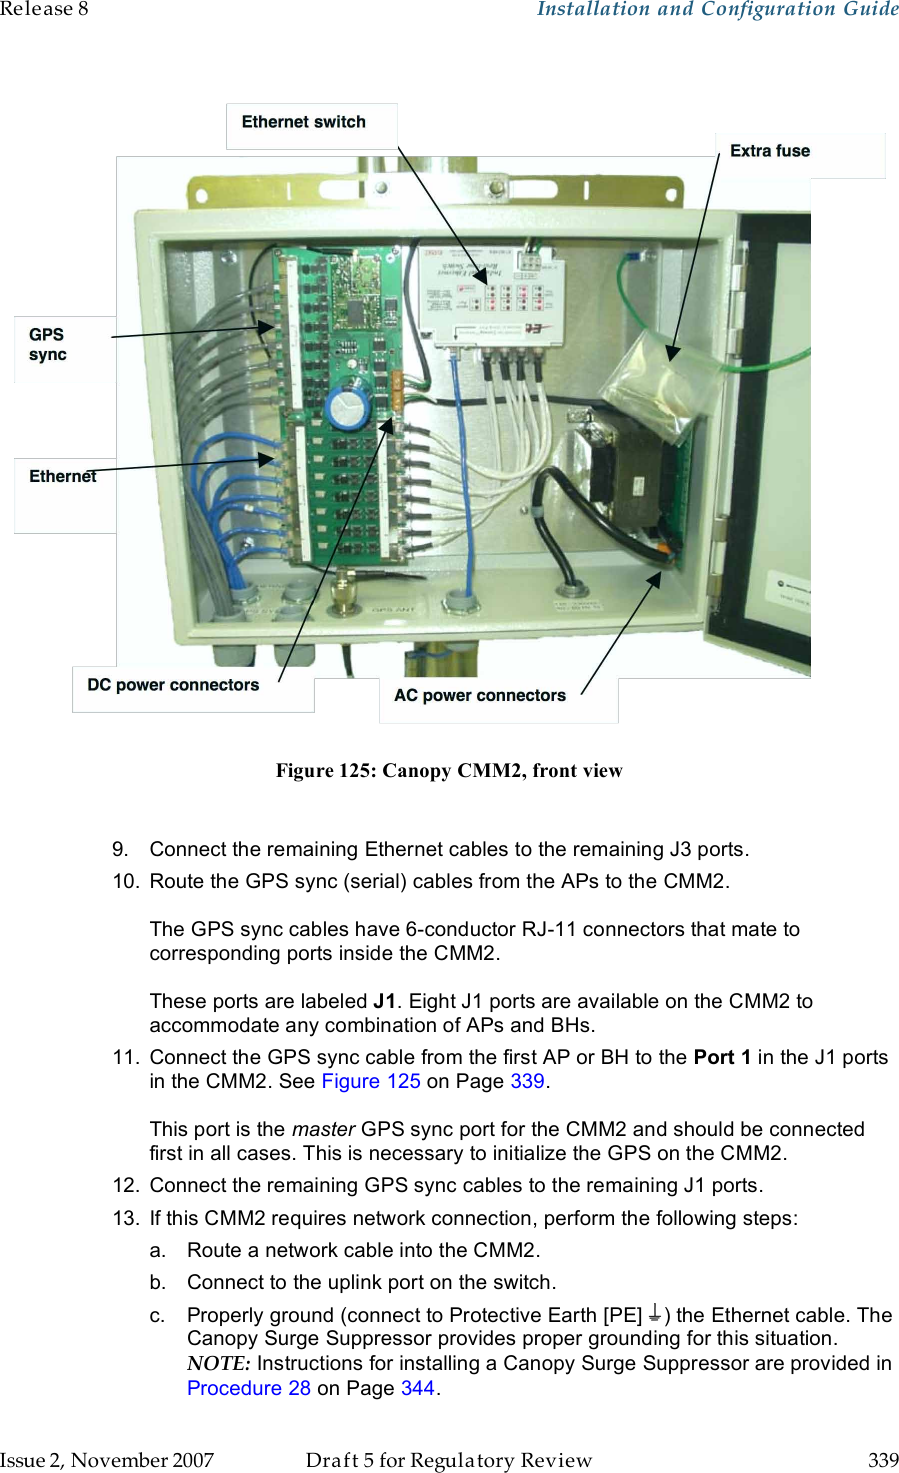 Release 8    Installation and Configuration Guide   Issue 2, November 2007  Draft 5 for Regulatory Review  339      Figure 125: Canopy CMM2, front view  9.  Connect the remaining Ethernet cables to the remaining J3 ports.  10.  Route the GPS sync (serial) cables from the APs to the CMM2.  The GPS sync cables have 6-conductor RJ-11 connectors that mate to corresponding ports inside the CMM2.   These ports are labeled J1. Eight J1 ports are available on the CMM2 to accommodate any combination of APs and BHs. 11.  Connect the GPS sync cable from the first AP or BH to the Port 1 in the J1 ports in the CMM2. See Figure 125 on Page 339.  This port is the master GPS sync port for the CMM2 and should be connected first in all cases. This is necessary to initialize the GPS on the CMM2. 12.  Connect the remaining GPS sync cables to the remaining J1 ports.  13.  If this CMM2 requires network connection, perform the following steps: a.  Route a network cable into the CMM2. b.  Connect to the uplink port on the switch. c.  Properly ground (connect to Protective Earth [PE]  ) the Ethernet cable. The Canopy Surge Suppressor provides proper grounding for this situation. NOTE: Instructions for installing a Canopy Surge Suppressor are provided in Procedure 28 on Page 344. 